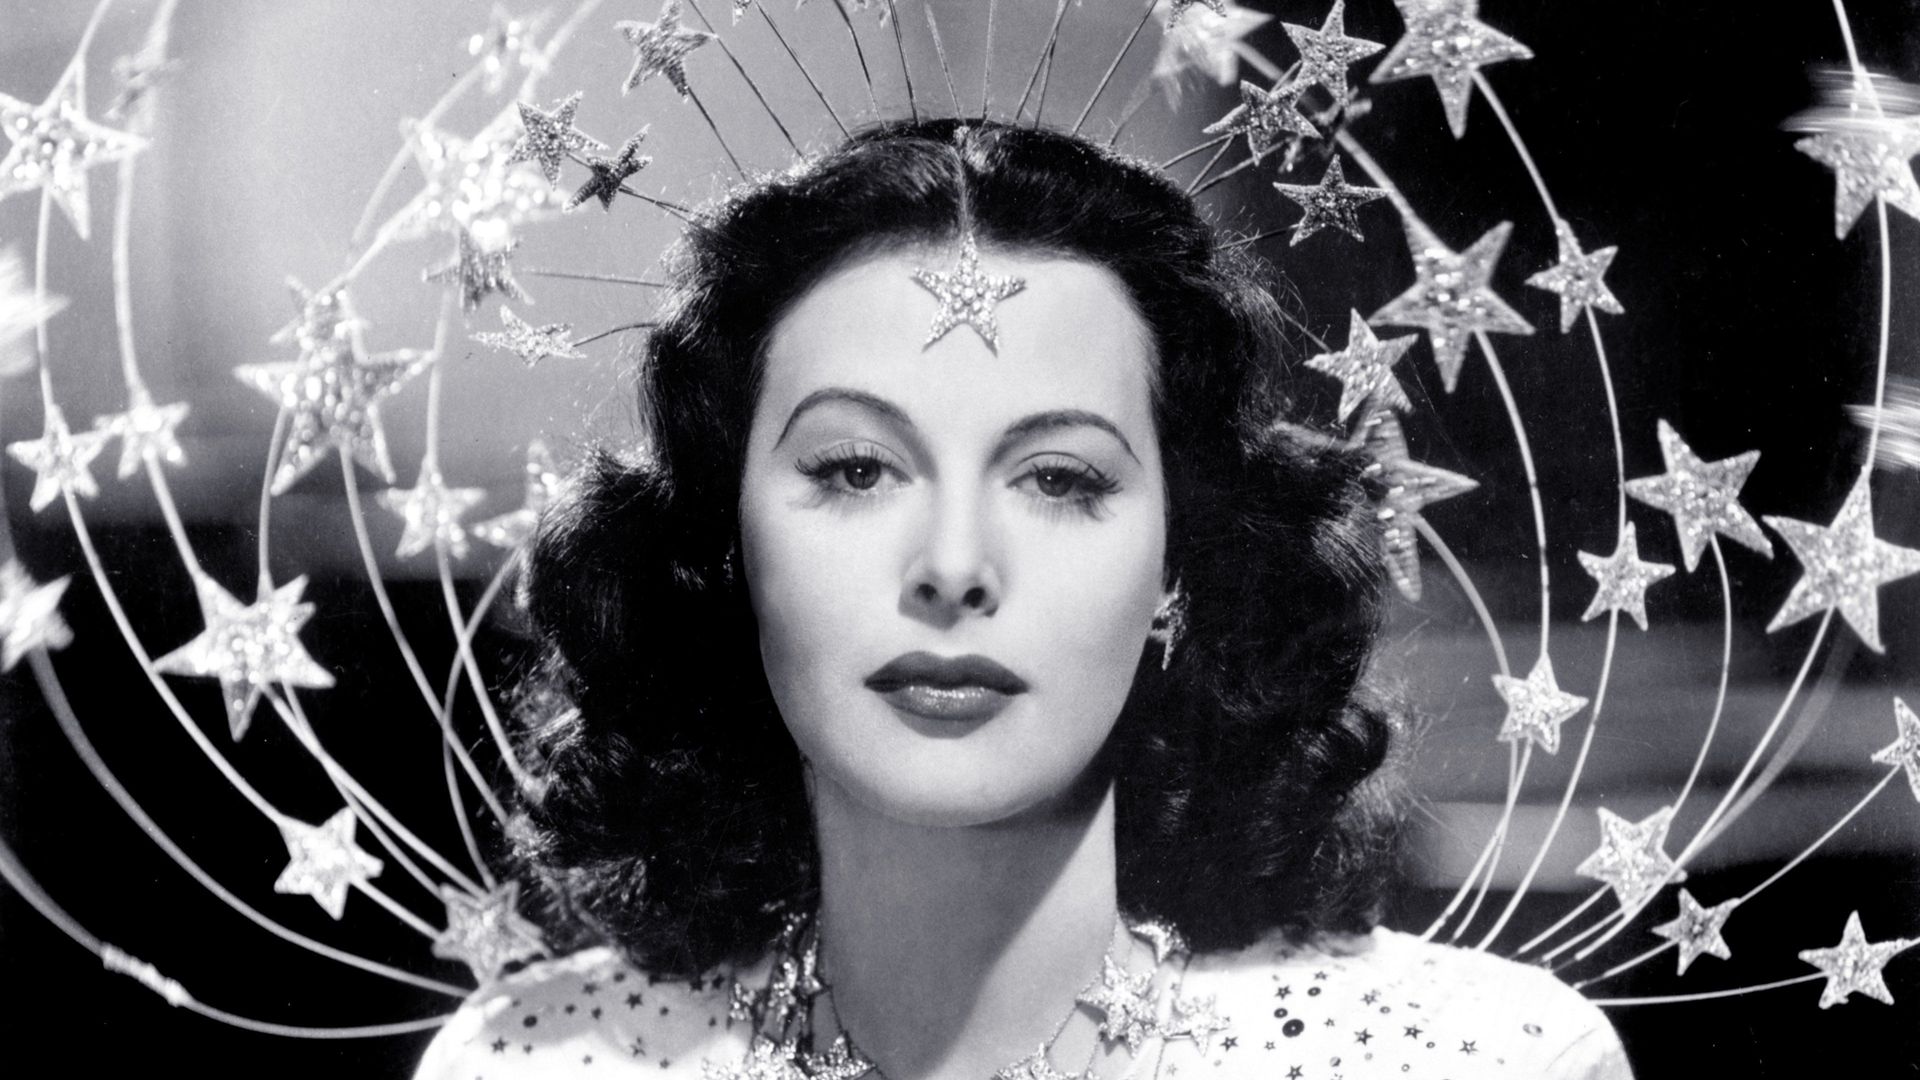 Bombshell: The Hedy Lamarr Story background